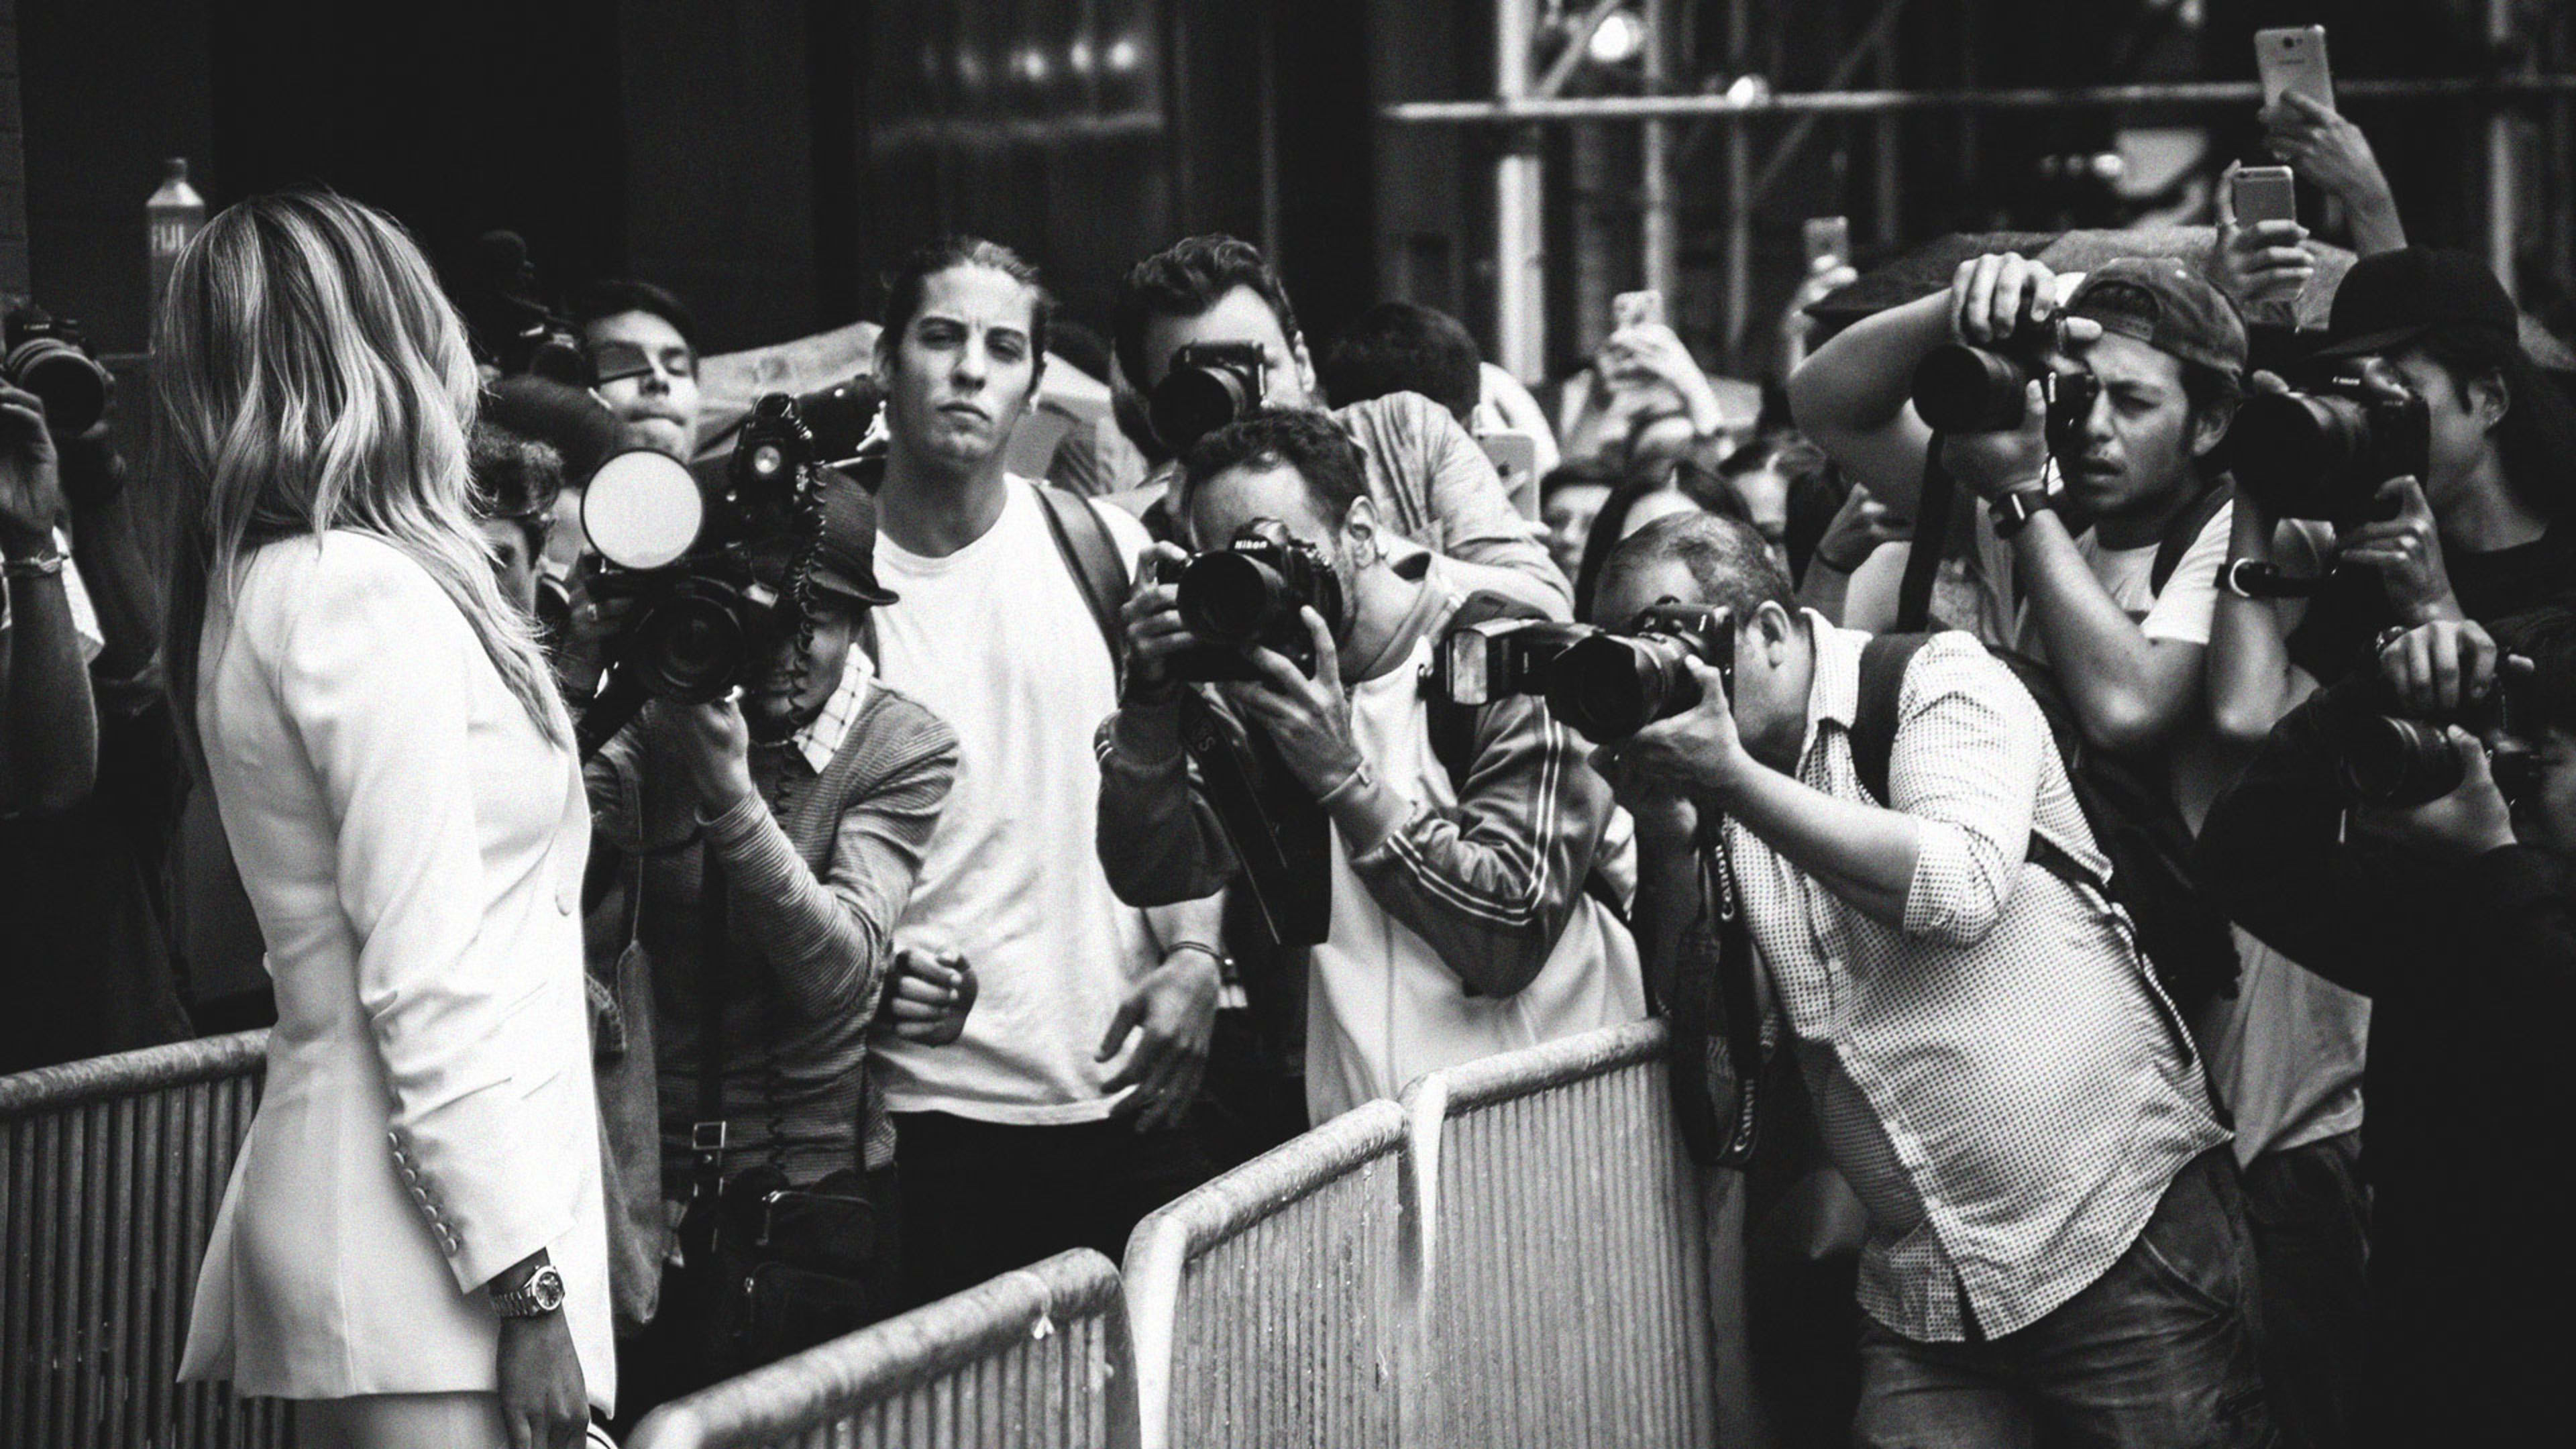 How celebrity paparazzi use similar risk strategies as Wall Street traders